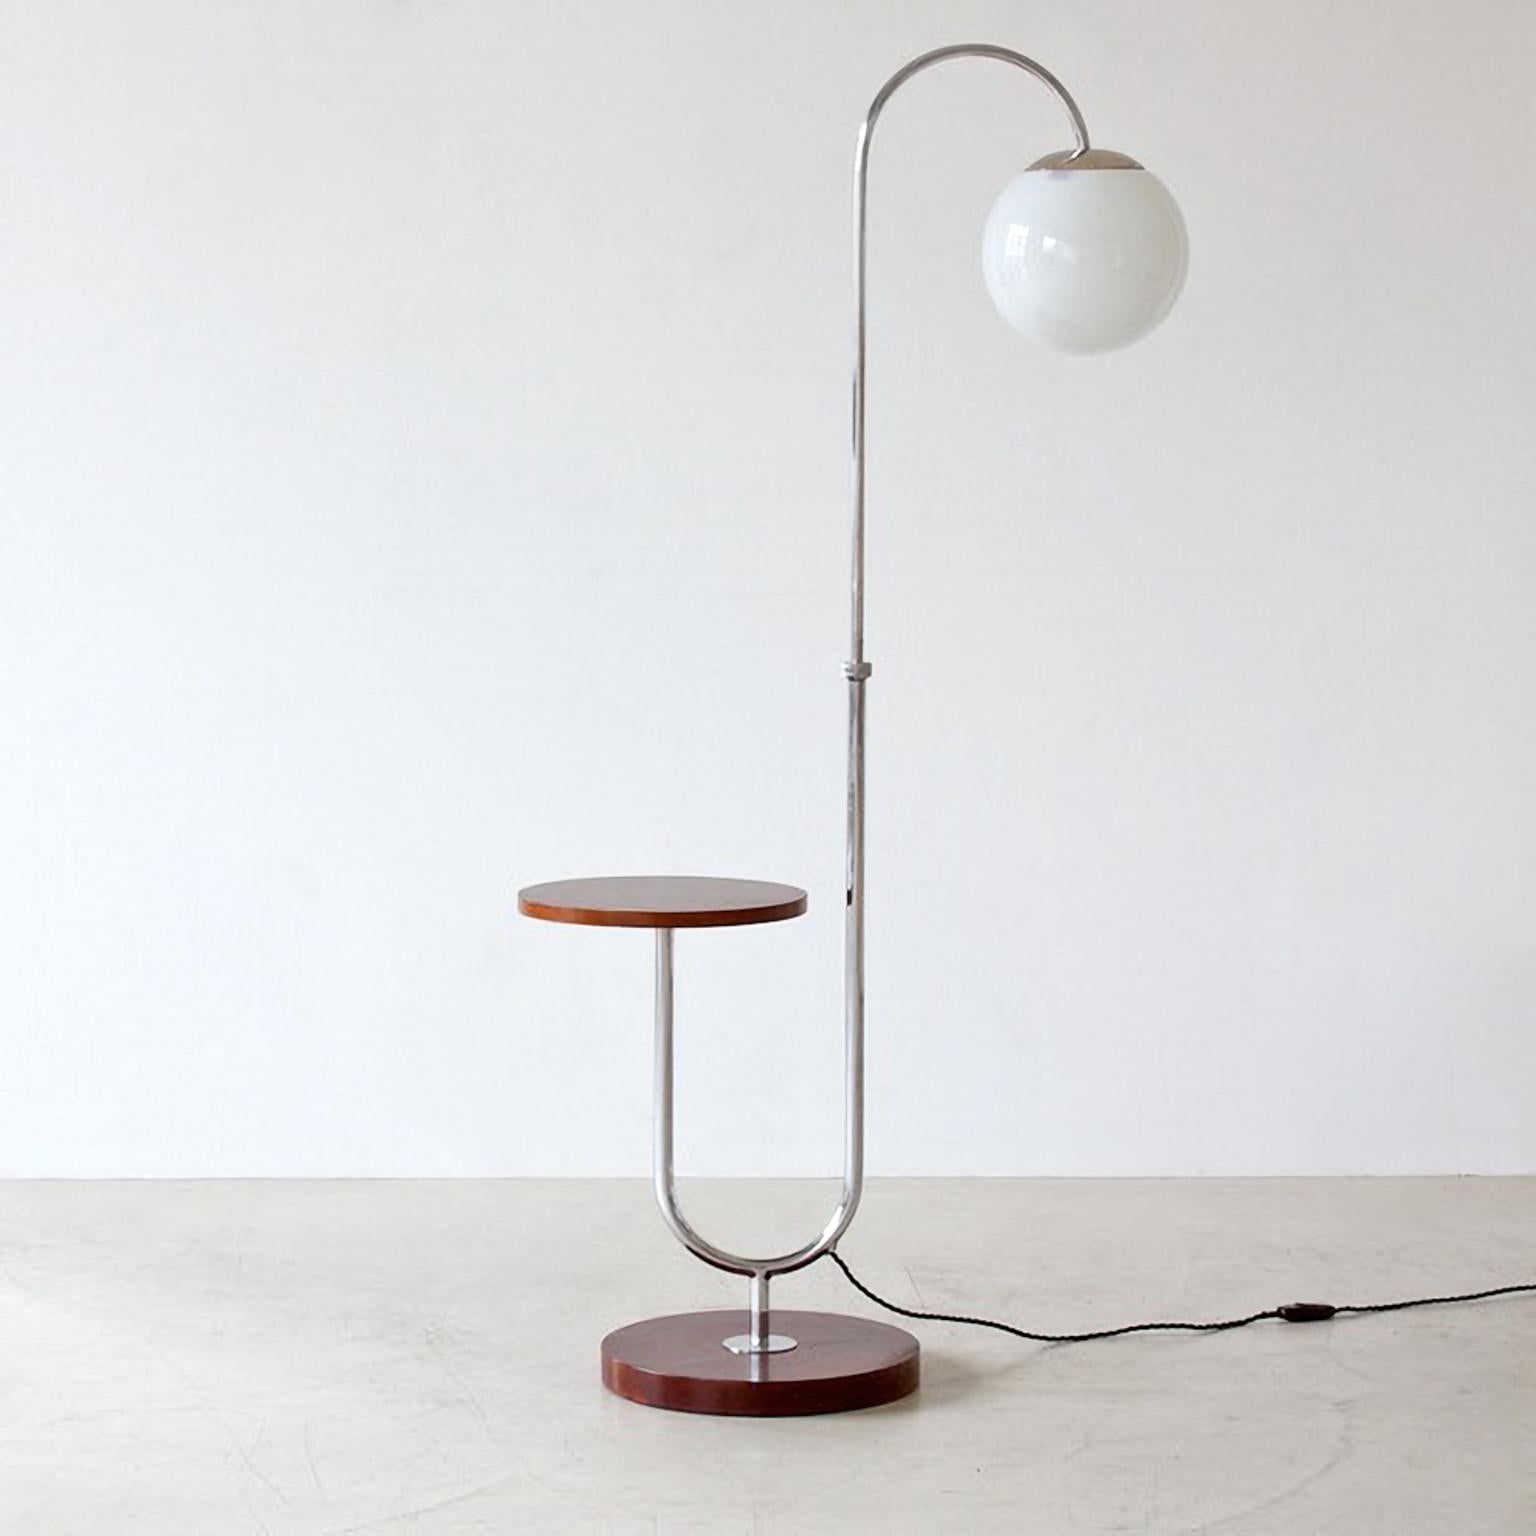 Czech Modernist Floor Lamp With Integrated Table, Nickel Plated Metal, Stained Wood For Sale